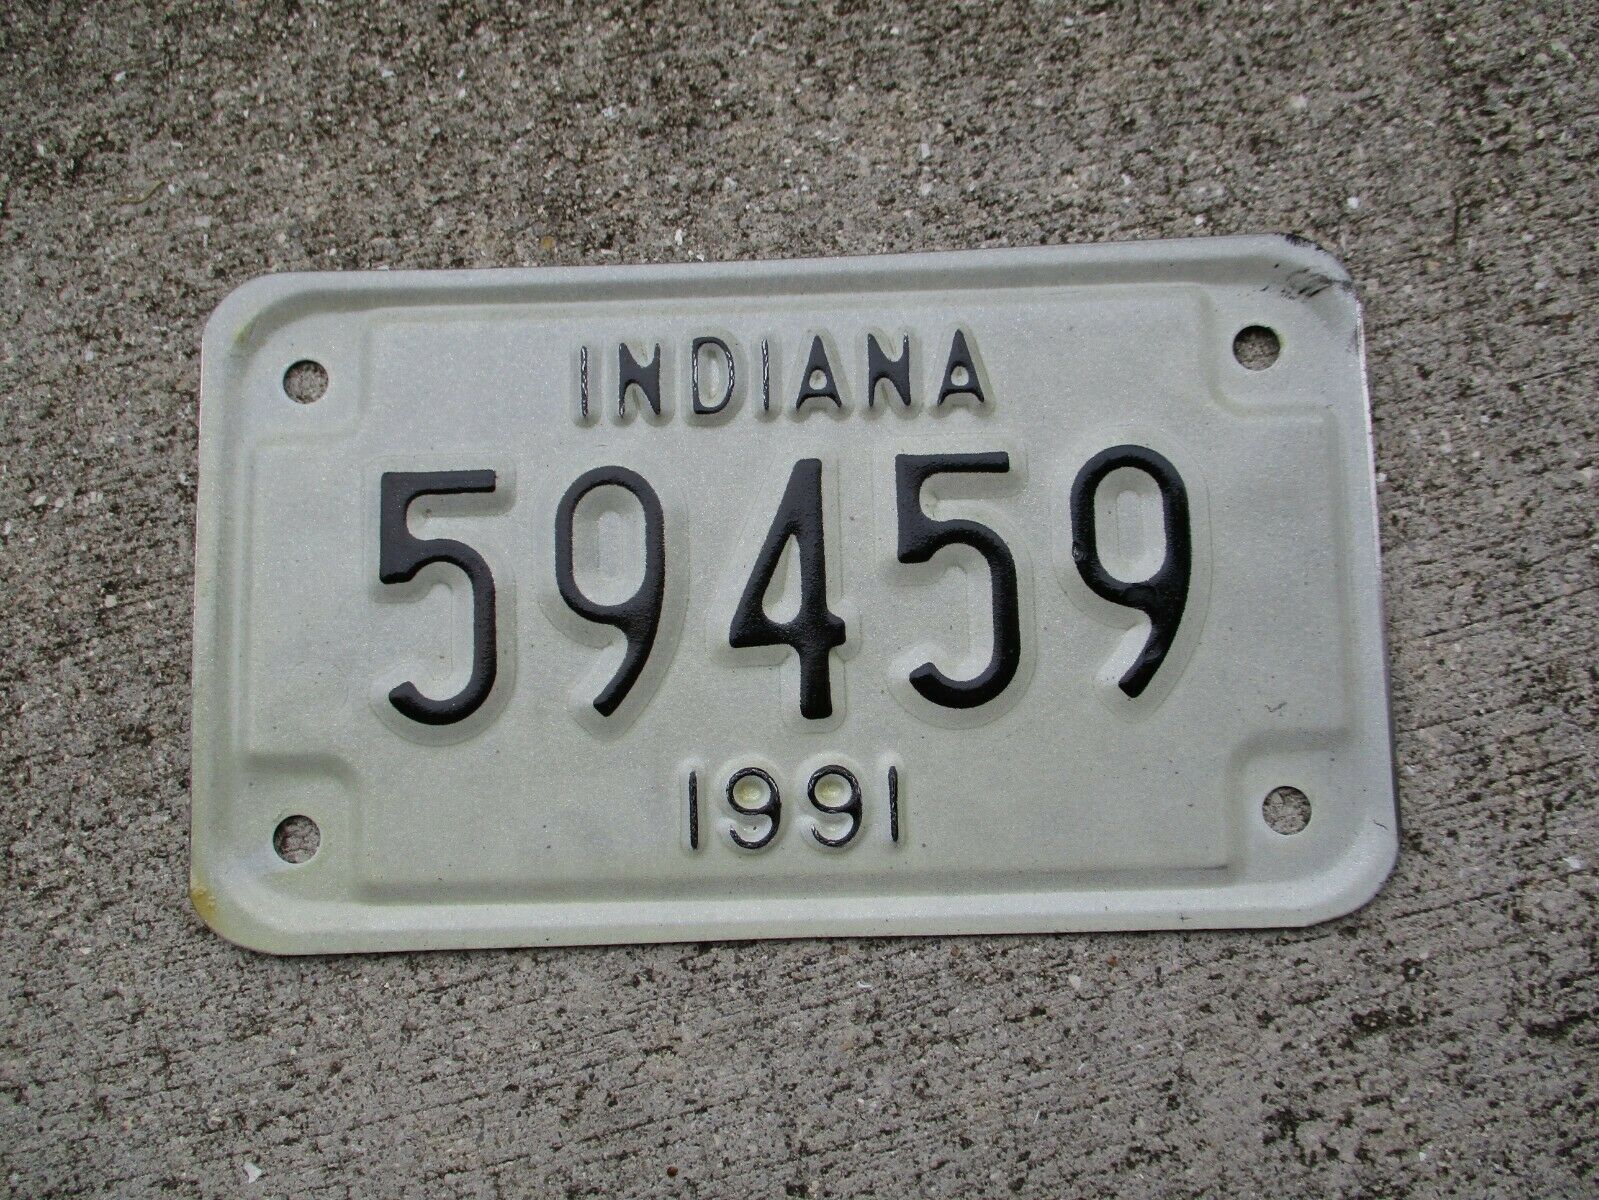 Indiana 1991 motorcycle  license plate #  59459